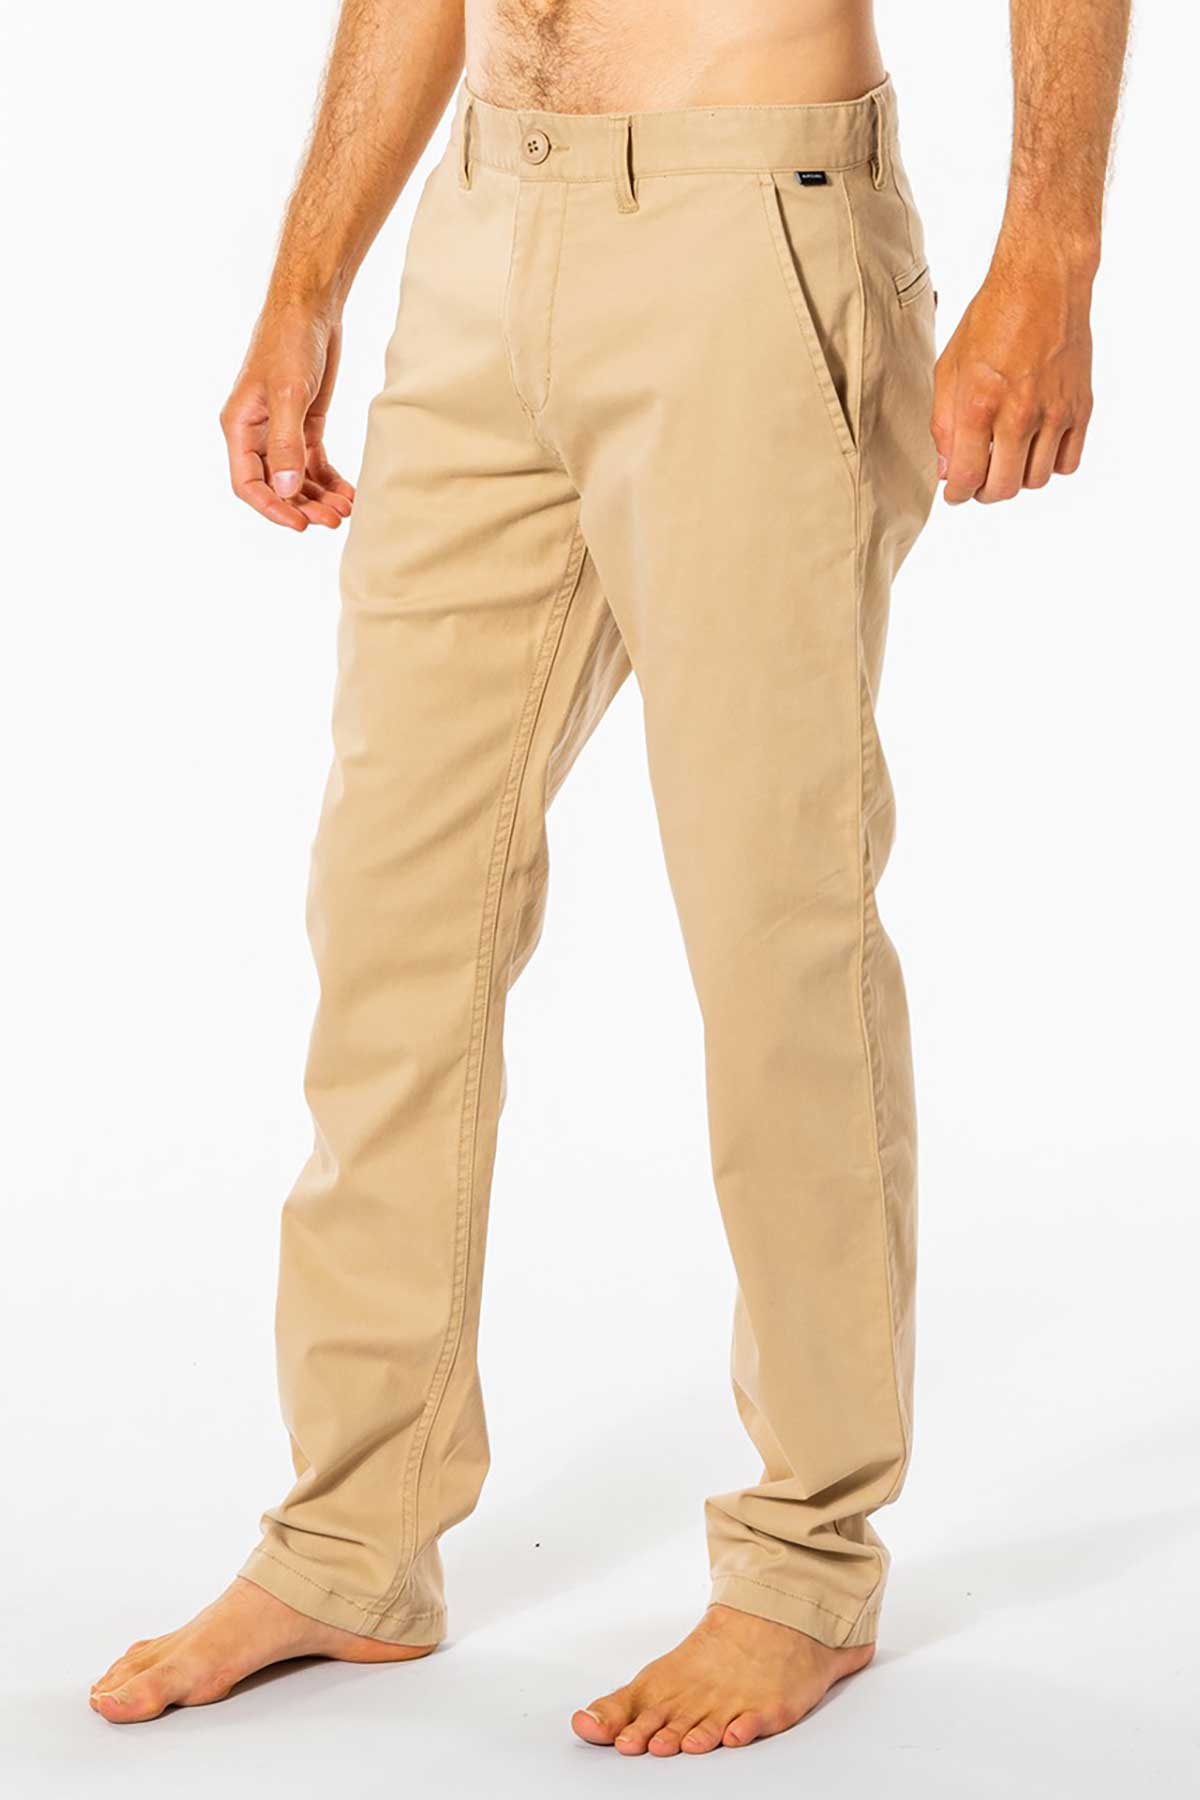 Rip Curl Mens Pant Re Entry Chino in khaki side view